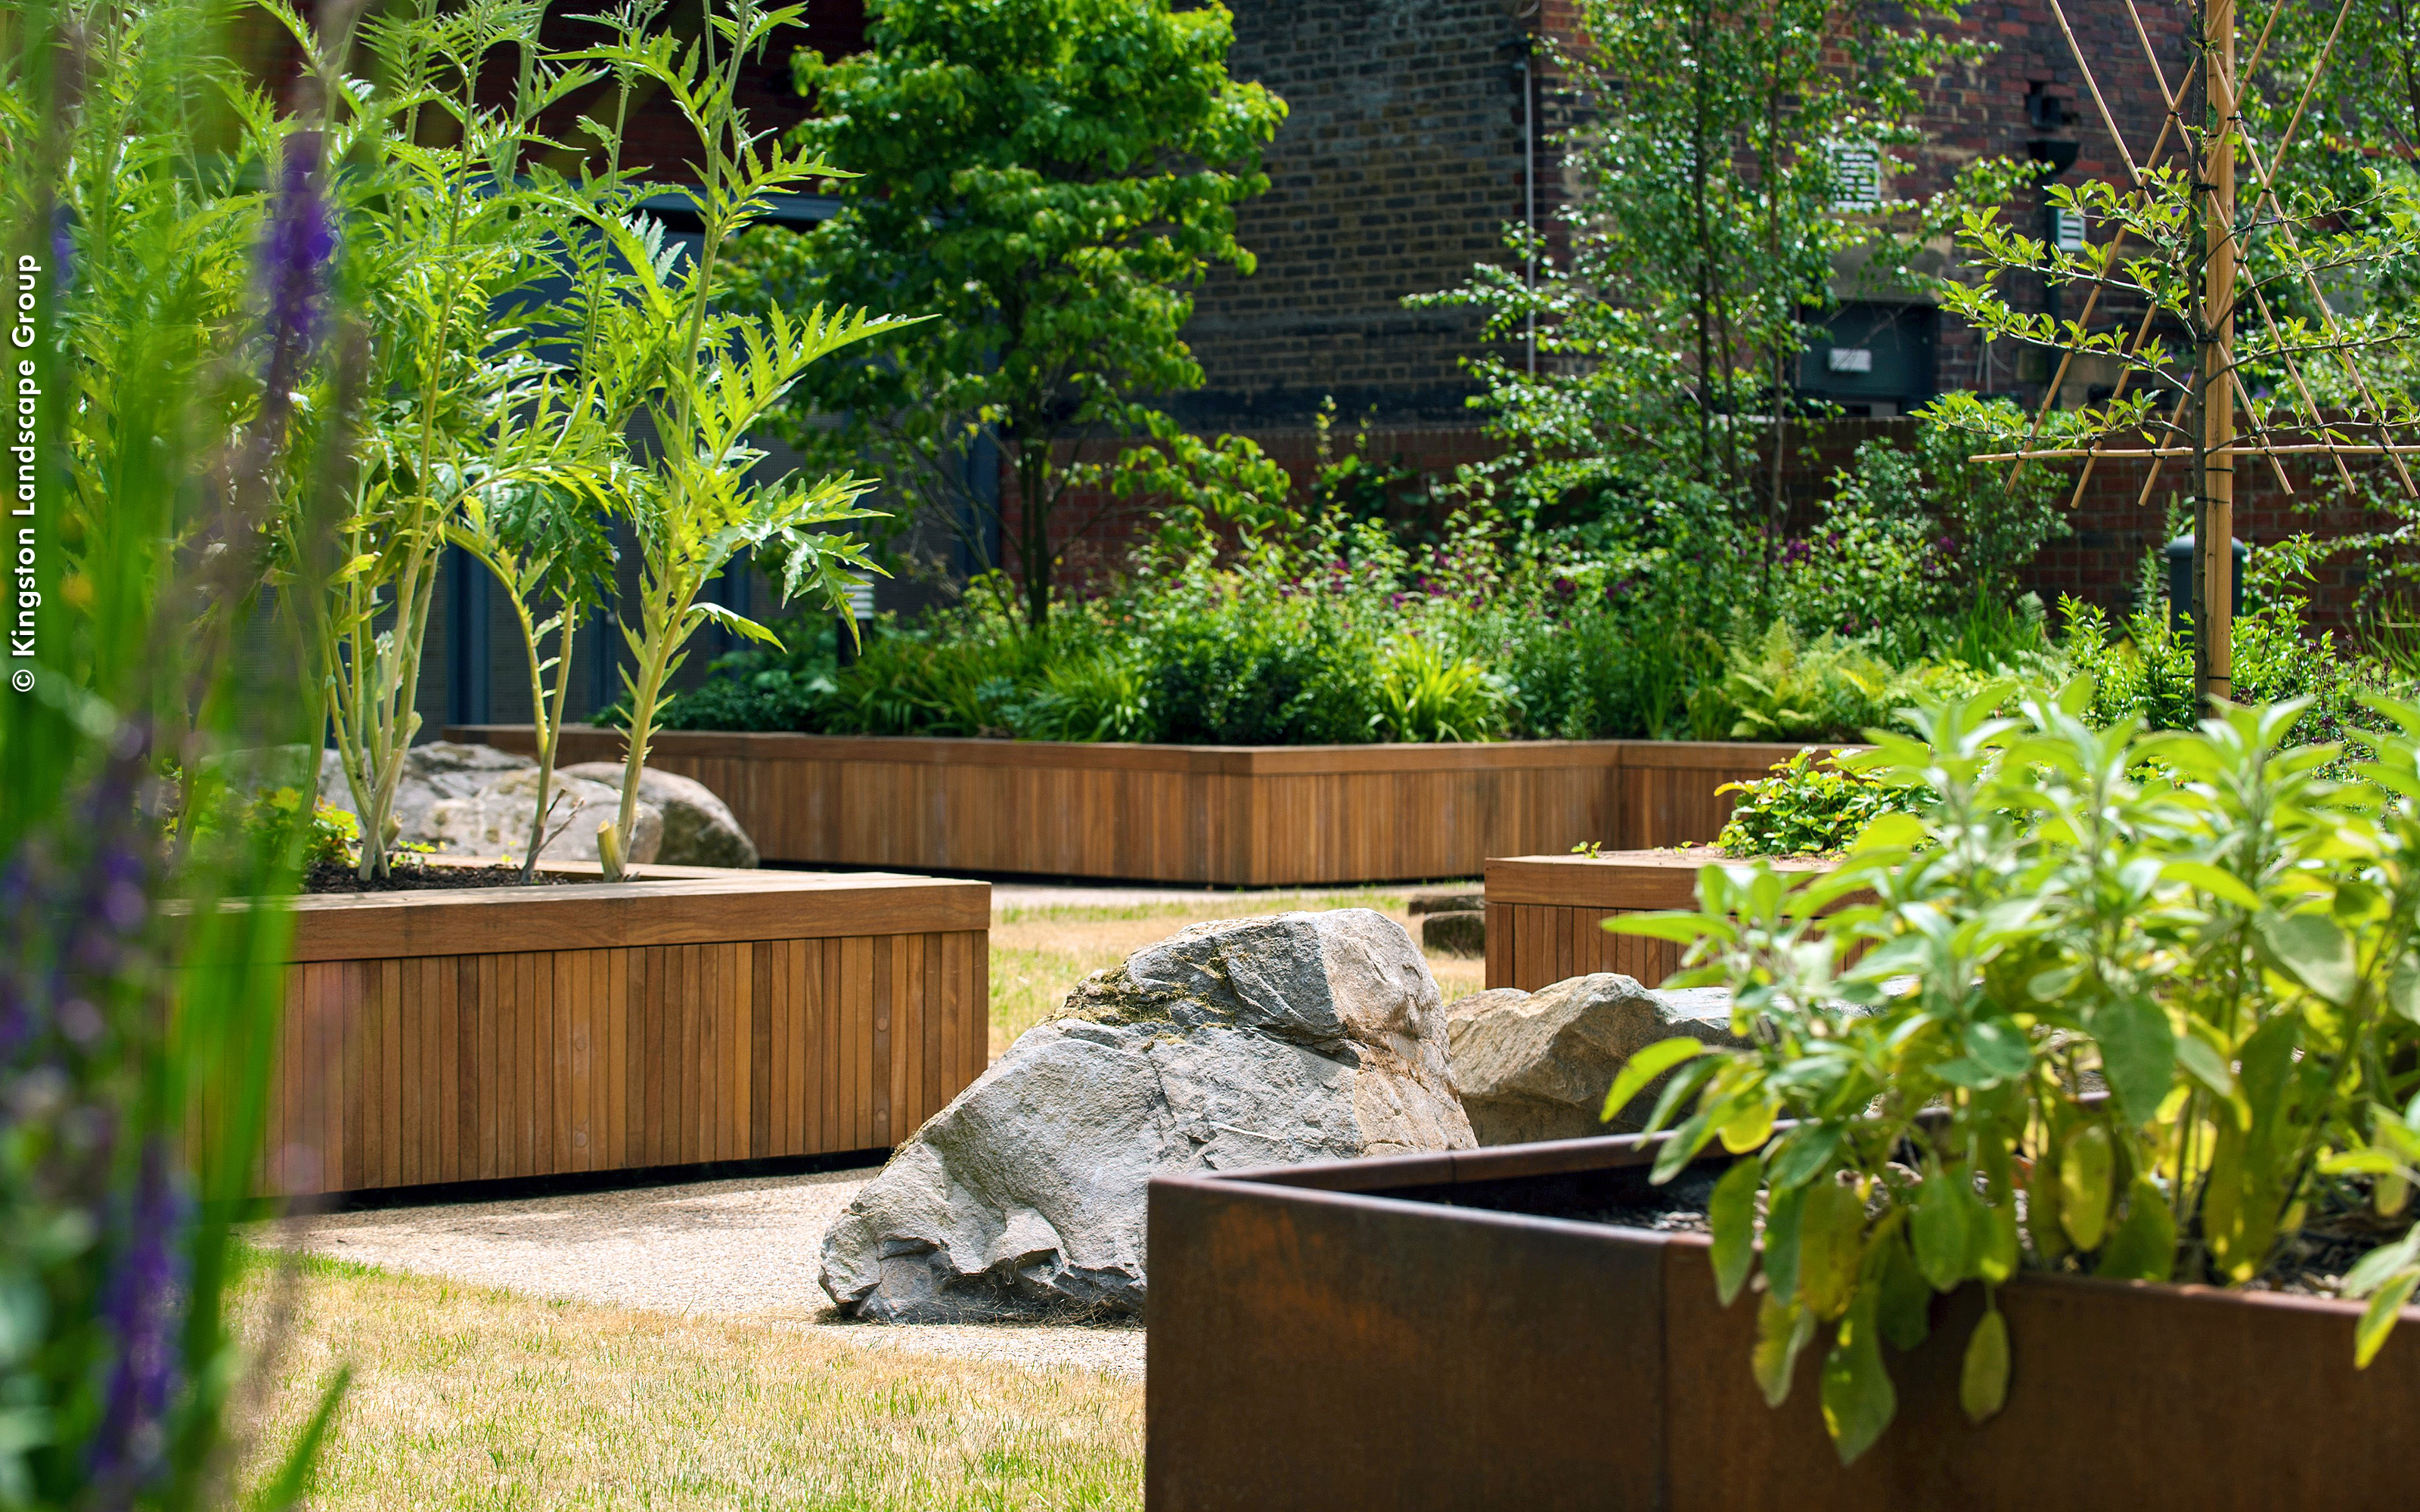 Large rocks surrounded by planters with lush greenery 